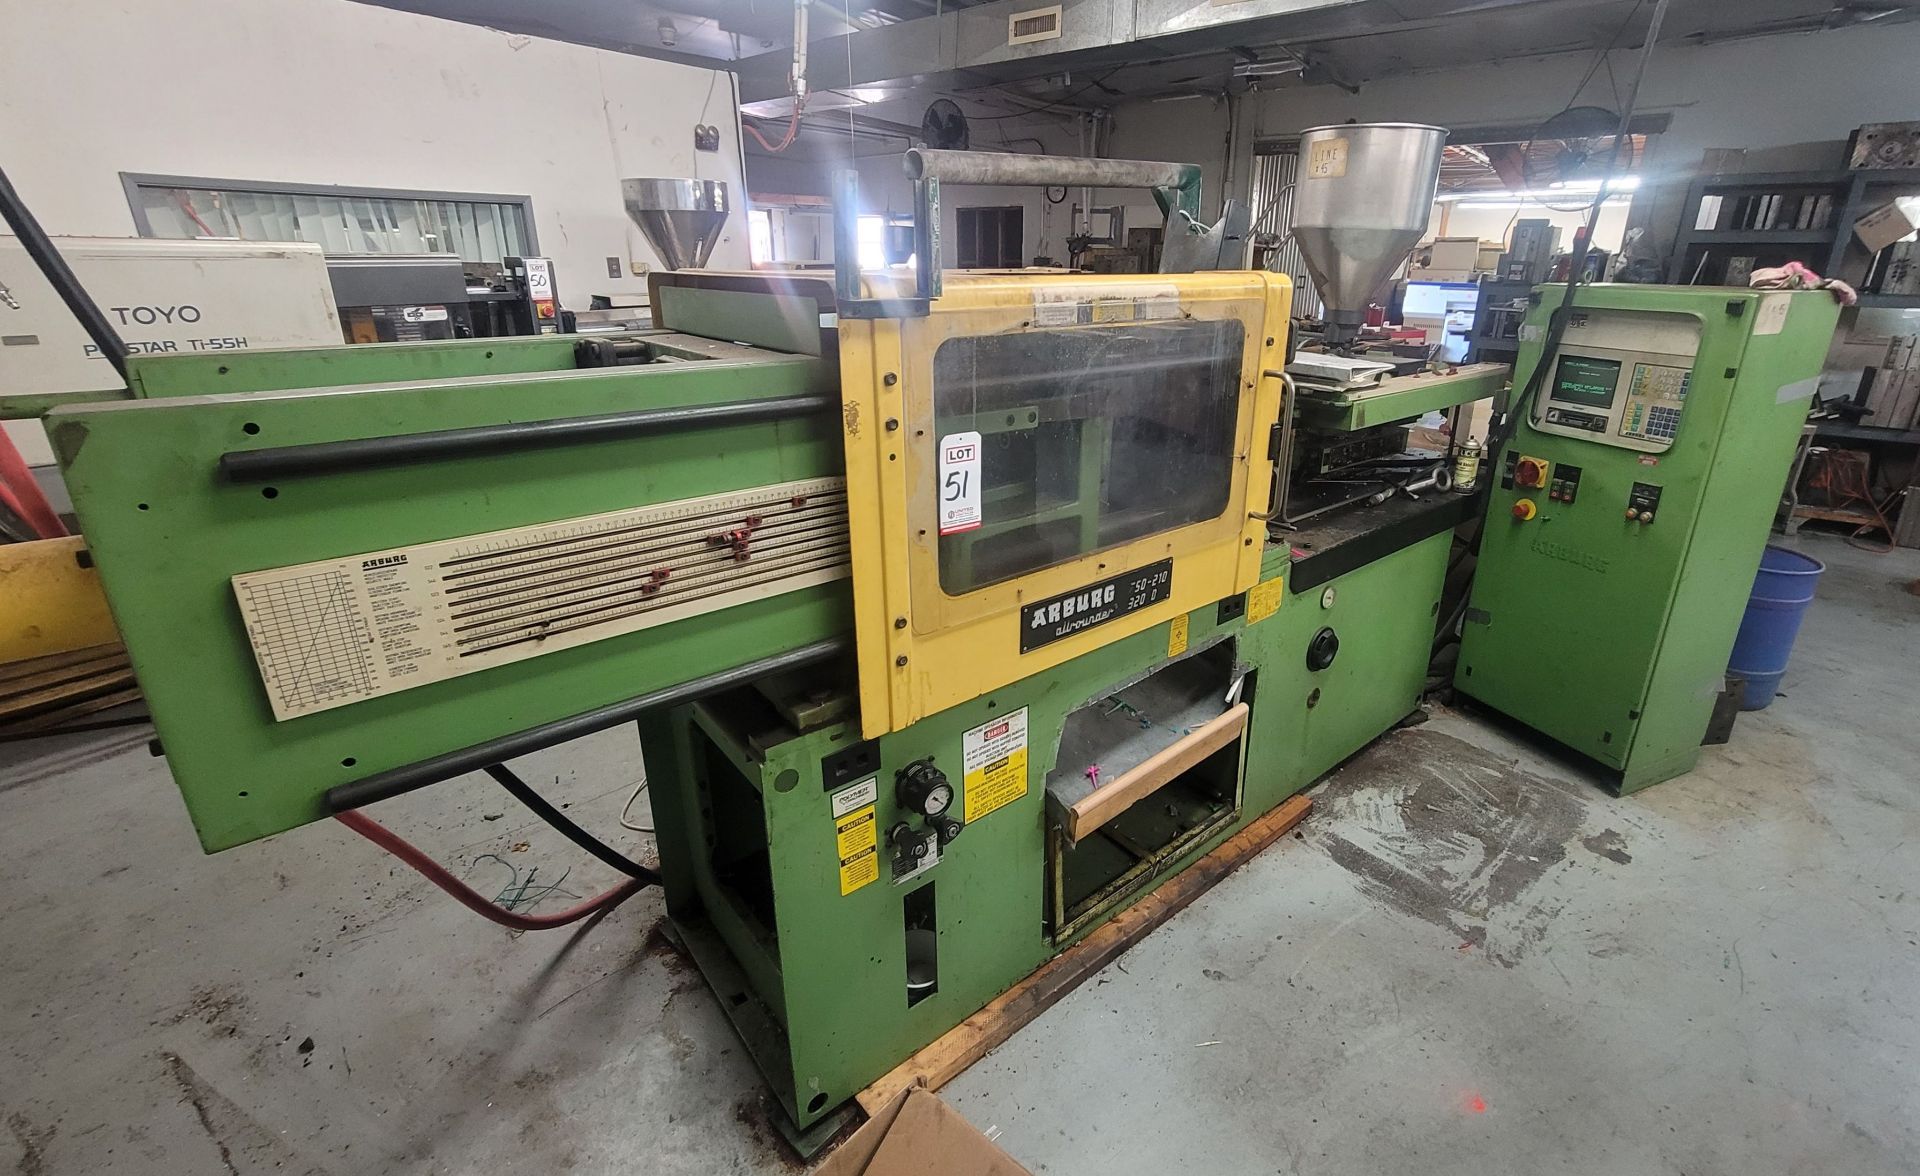 ARBURG ALLROUNDER 320 D 750-210 INJECTION MOLDING MACHINE, 75 TON CAPACITY, S/N 148908